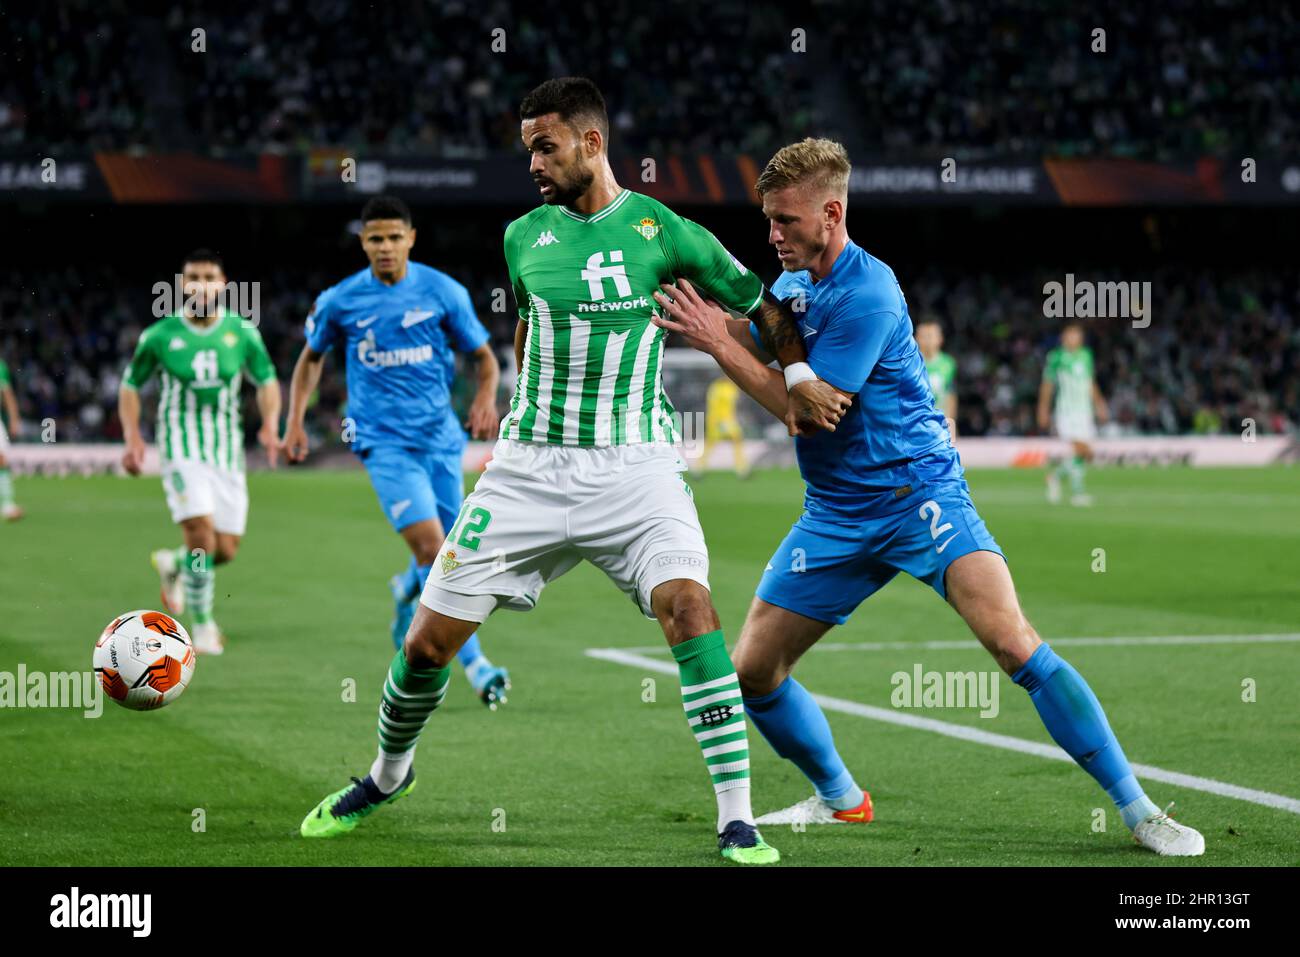 SEVILLA, SPAIN - FEBRUARY 24: Willian Jose of Real Betis in duel with Dmitri Chistyakov of FC Zenit during the UEFA Europa League Knockout Round Play-Offs match between Real Betis and FK Zenit Sint-Petersburg at Estadio Benito Villamarin on February 24, 2022 in Sevilla, Spain (Photo by DAX Images/Orange Pictures)SEVILLA, SPAIN - FEBRUARY 24: Willian Jose of Real Betis in duel with Dmitri Chistyakov of FC Zenit during the UEFA Europa League Knockout Round Play-Offs match between Real Betis and FK Zenit Sint-Petersburg at Estadio Benito Villamarin on February 24, 2022 in Sevilla, Spain (Photo by Stock Photo